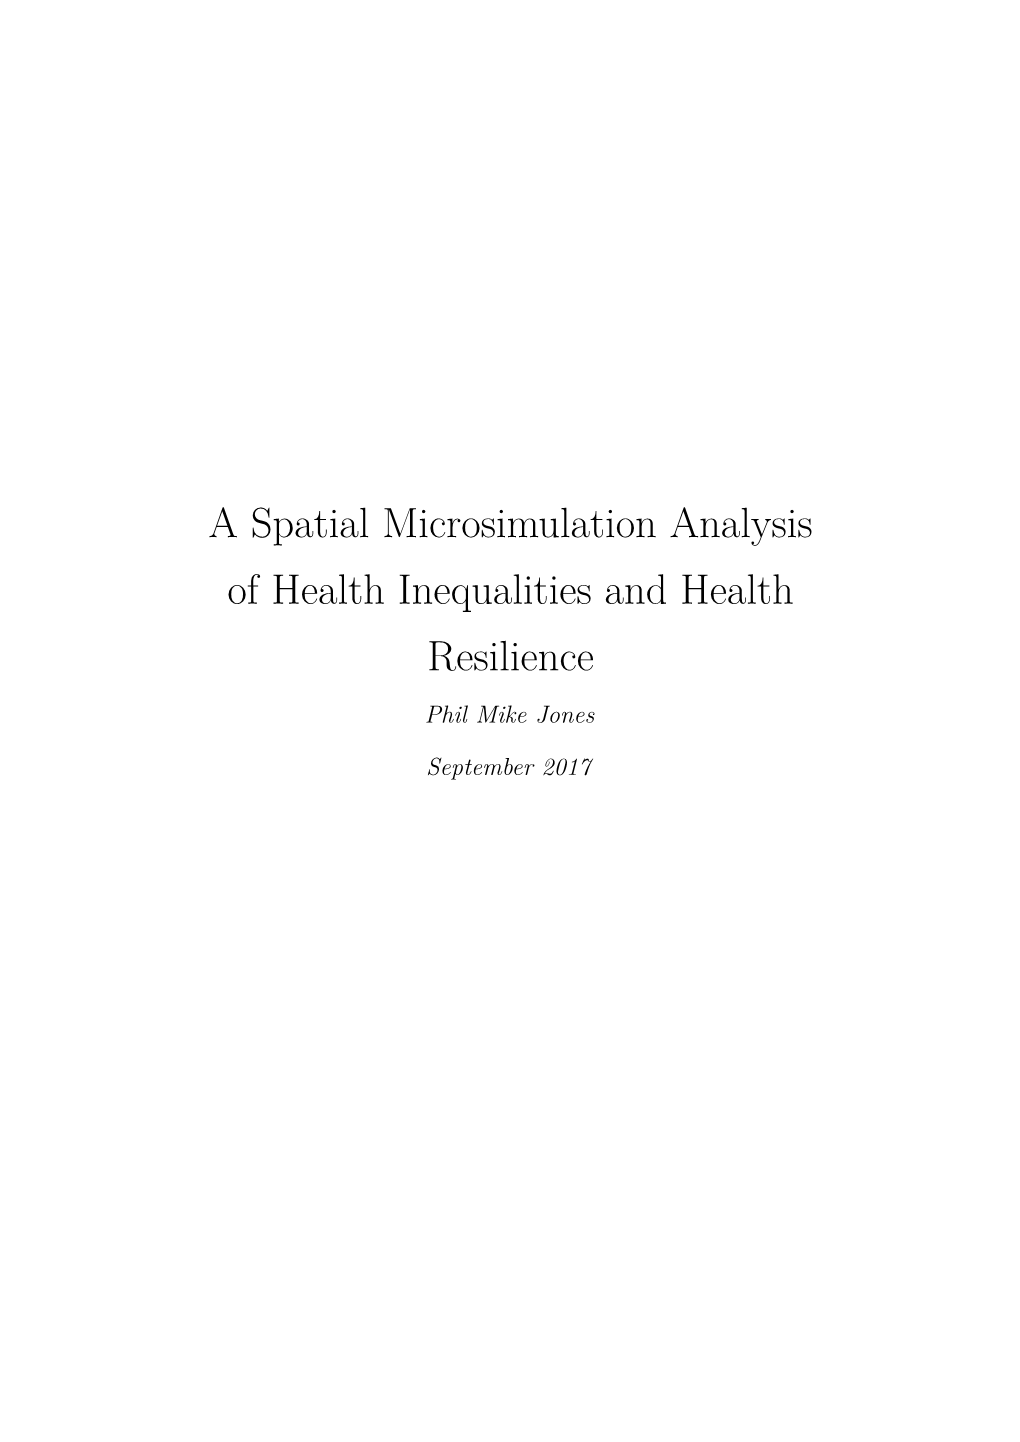 A Spatial Microsimulation Analysis of Health Inequalities and Health Resilience Phil Mike Jones